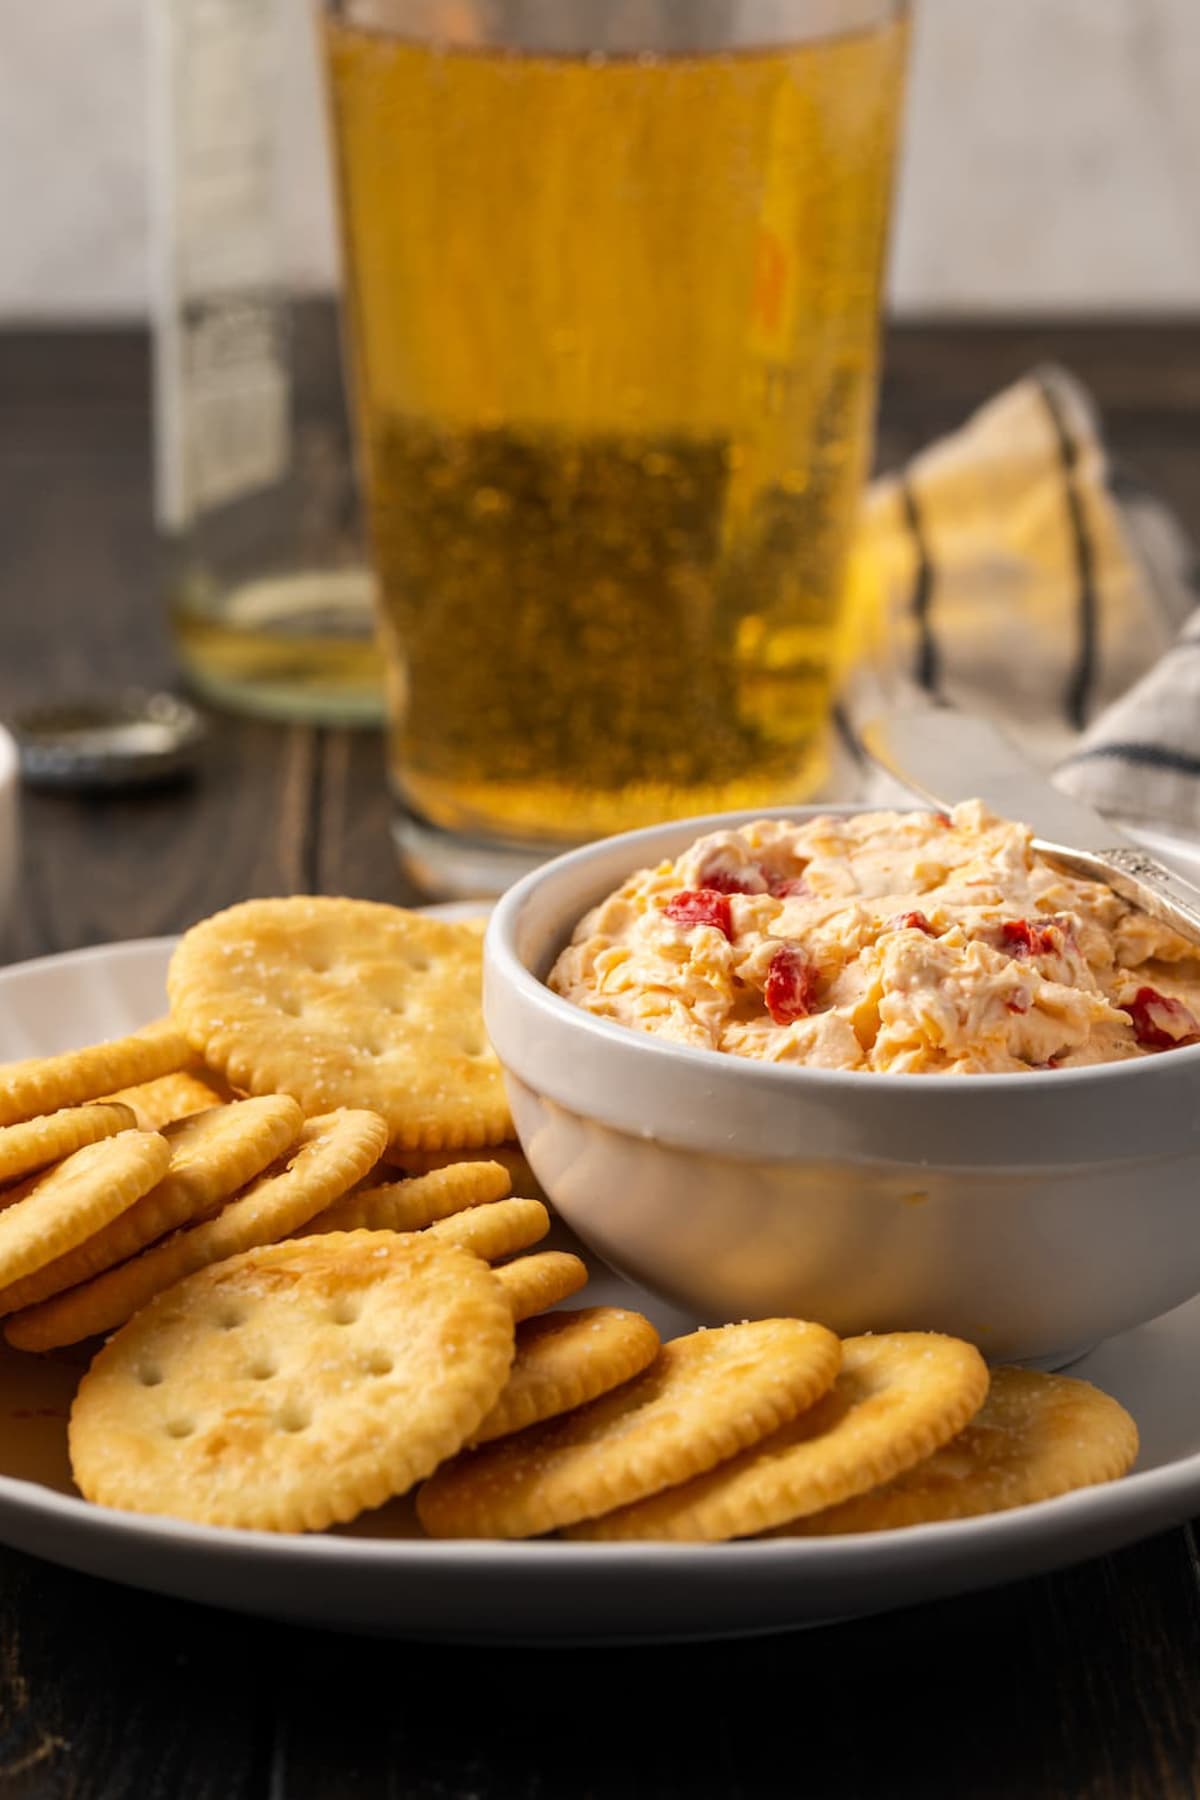 A bowl of pimento cheese served on a platter of crackers, with glasses of beer in the background.